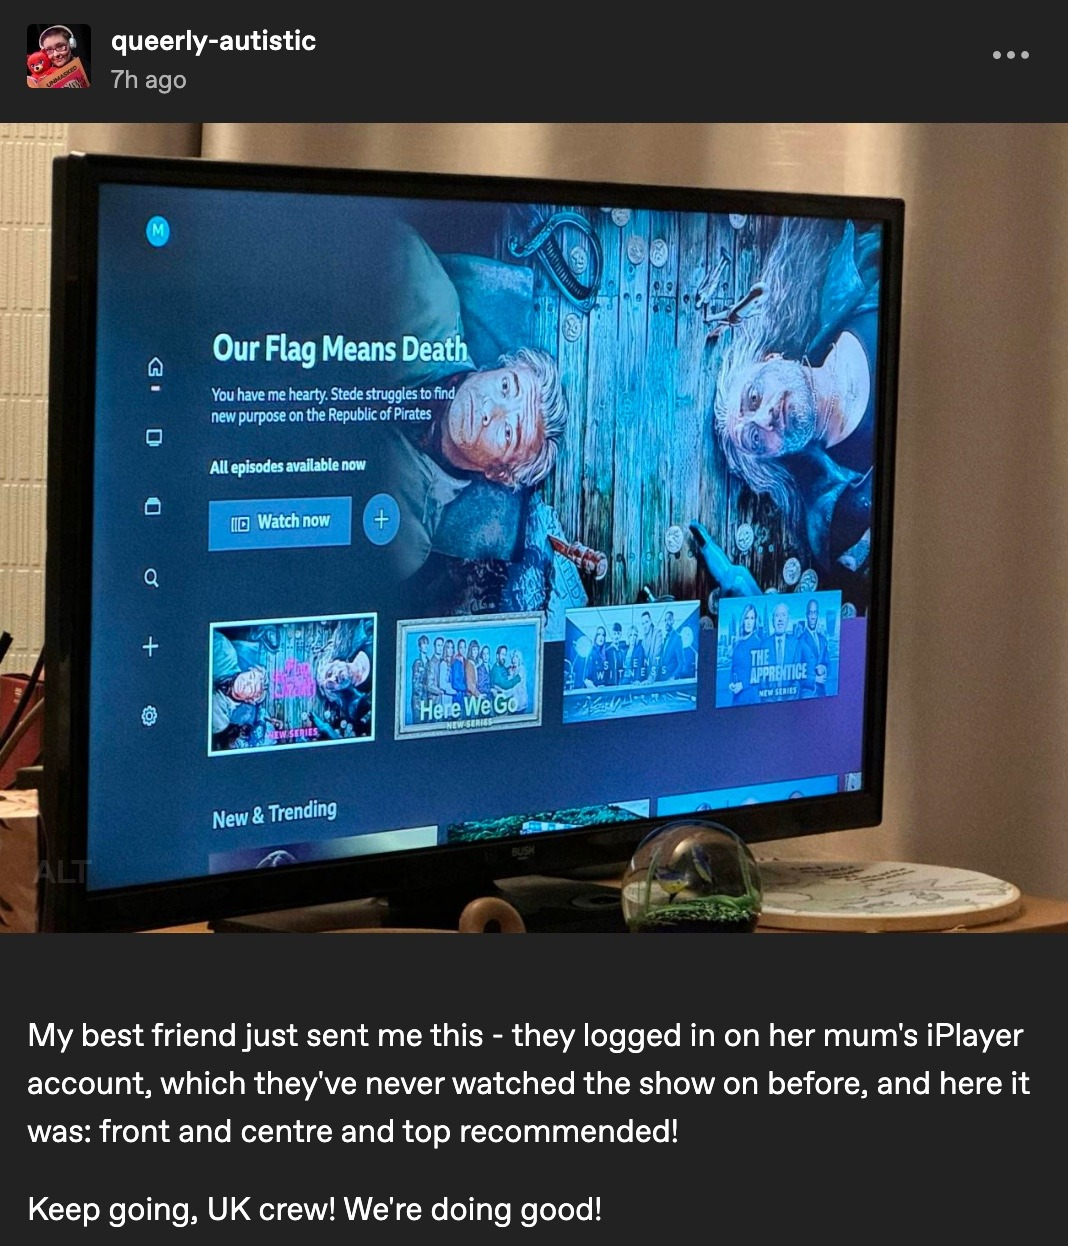 Image Description: Picture of OFMD on iplayer Text: My best friend just sent me this - they logged in on her mum's iPlayer account, which they've never watched the show on before, and here it was: front and centre and top recommended!   Keep going, UK crew! We're doing good! 